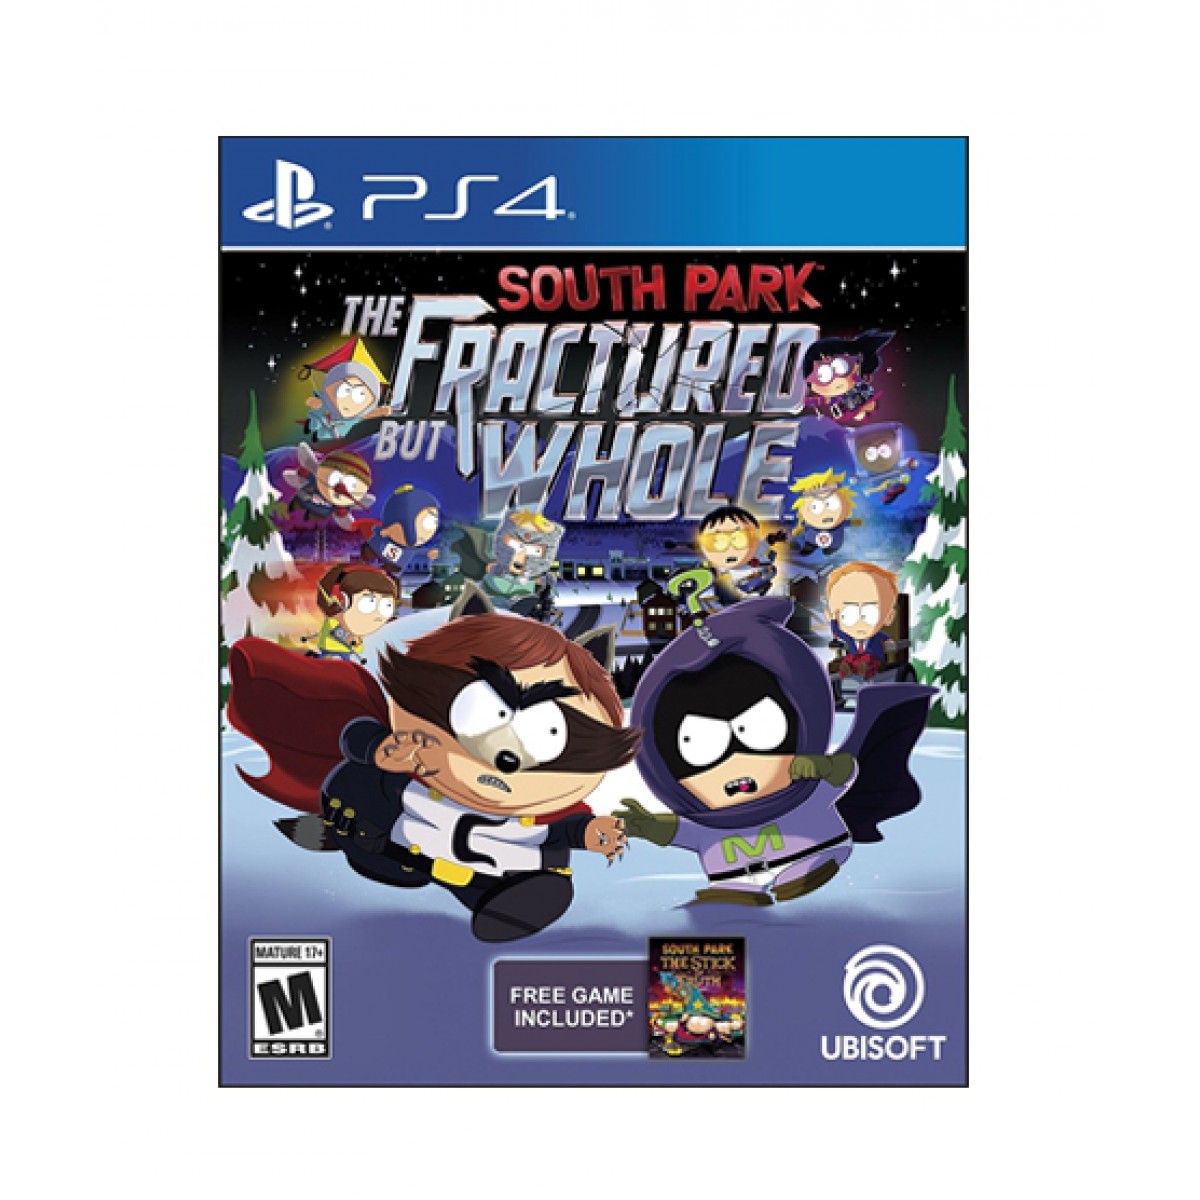 South Park The Fractured But Whole Gold Edition - PlayStation 4 Játékok